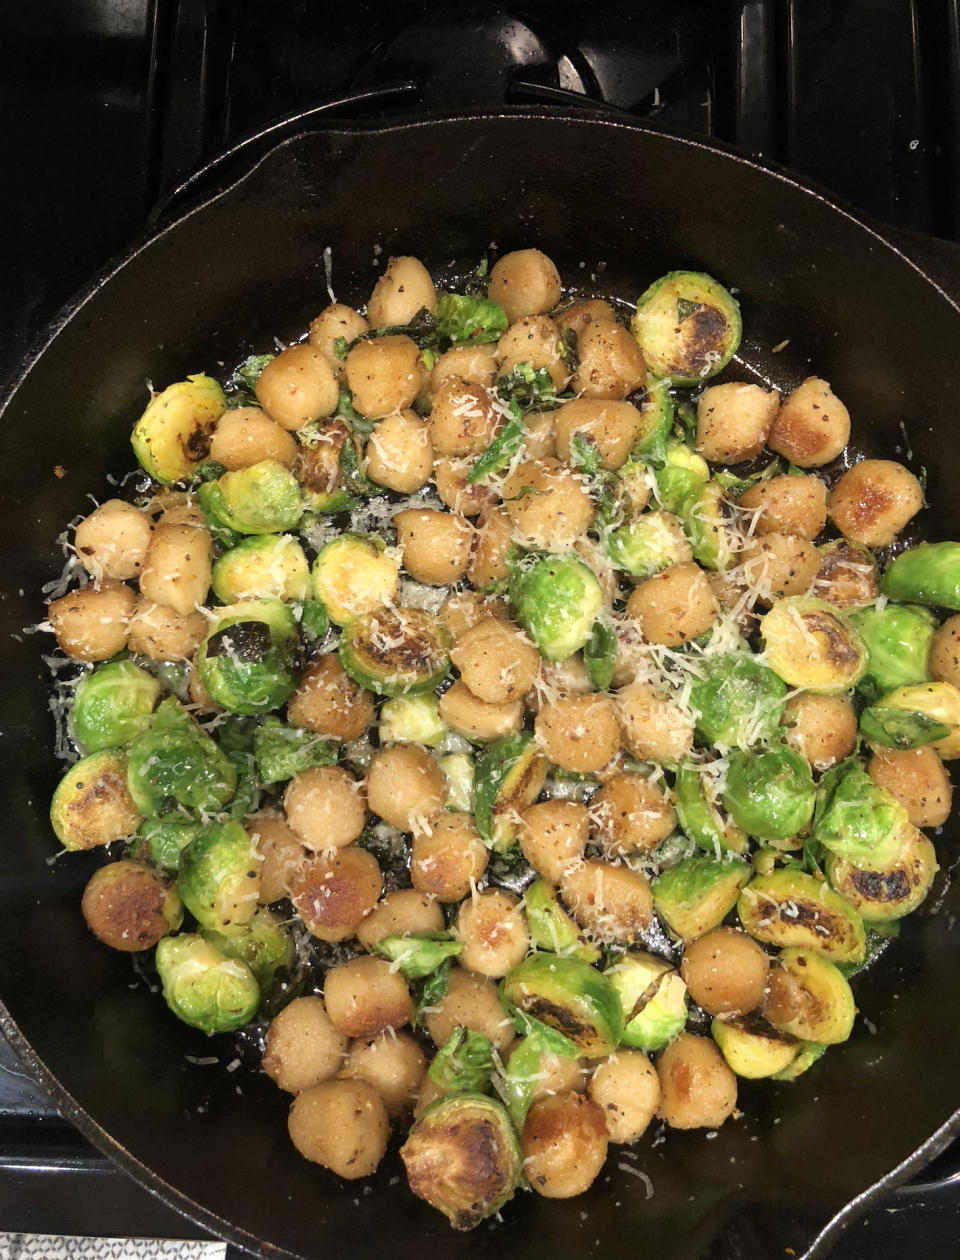 Sautéed Brussels sprouts and round potatoes in a pan, sprinkled with grated cheese